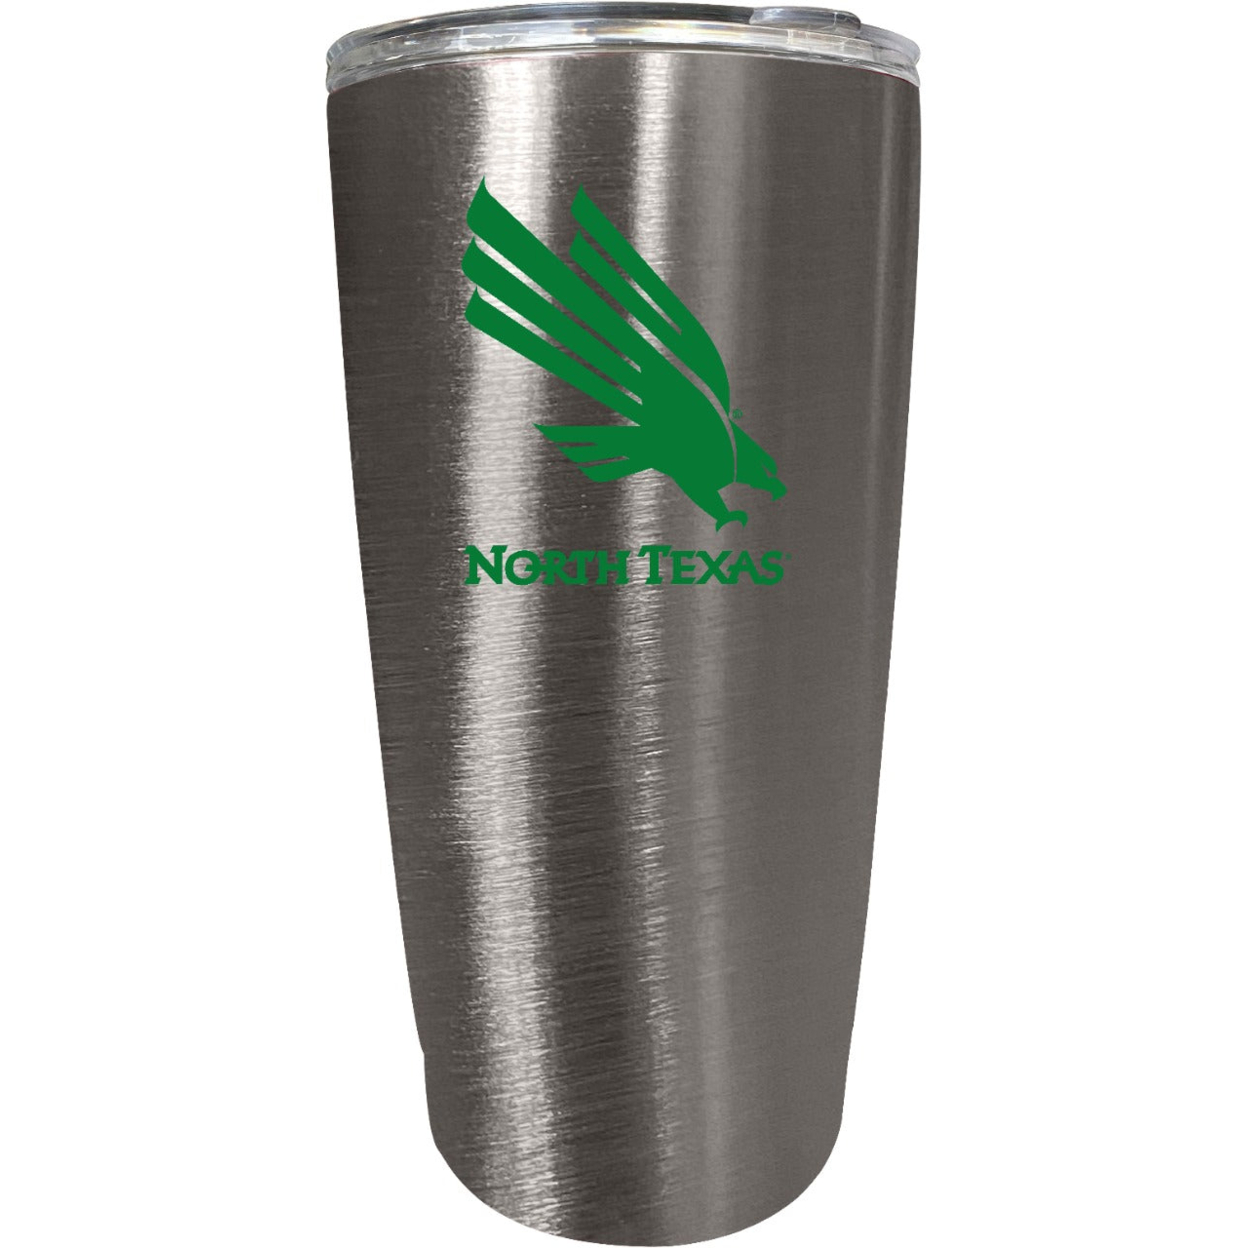 North Texas 16 Oz Insulated Stainless Steel Tumbler Colorless